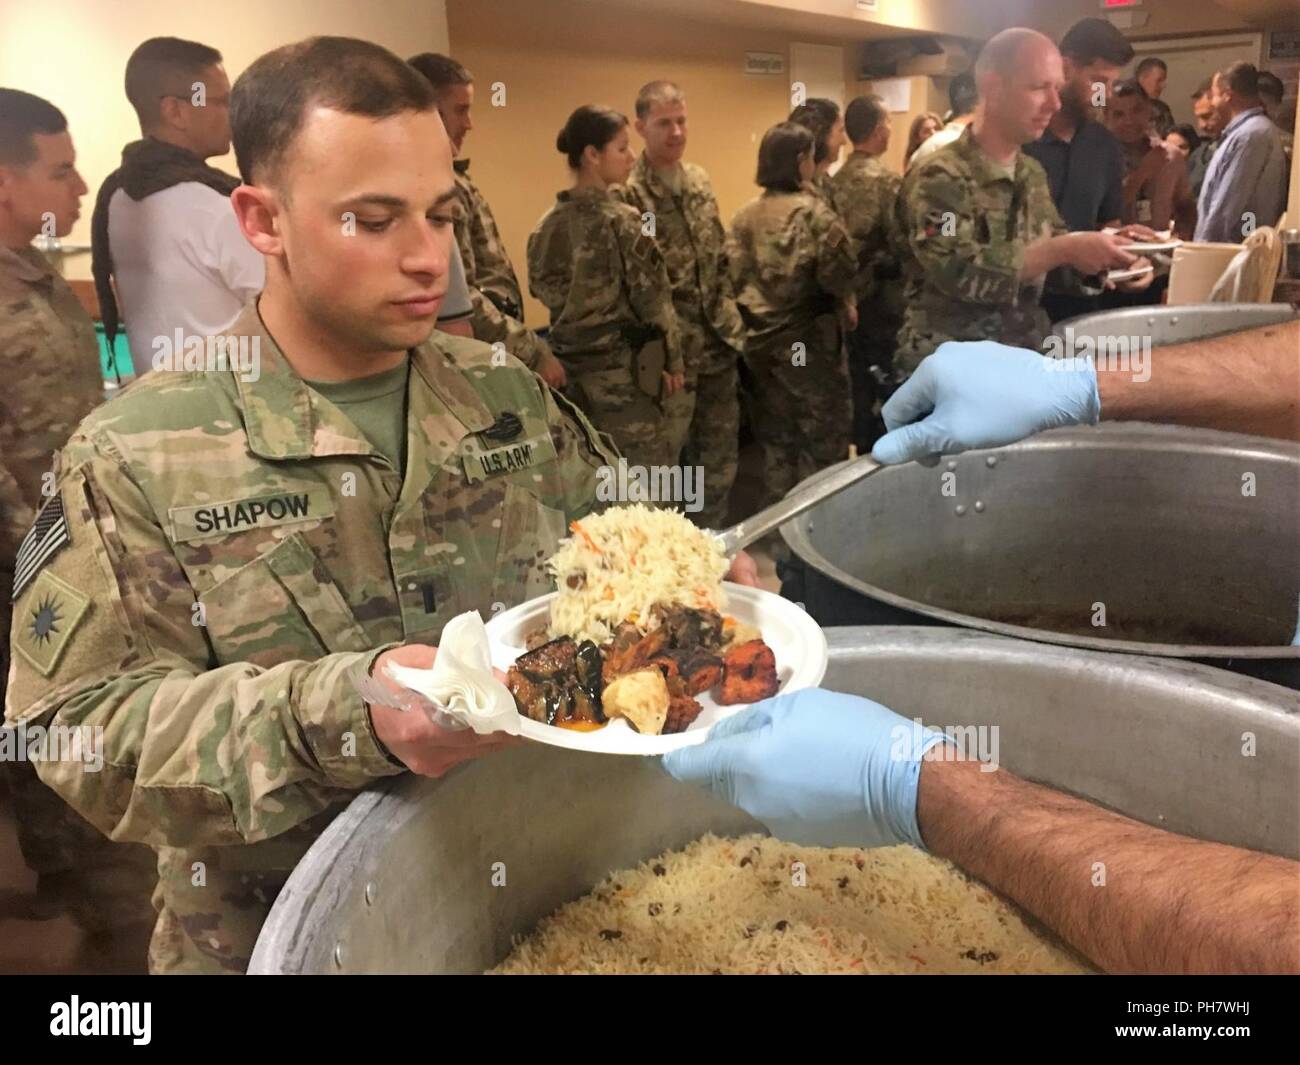 First Lt. Bryan Shapow, the aide-de-camp for Brig. Gen. John Lathrop, commander for Train, Advise and Assist Command-South, comprised of the 40th Infantry Division, California National Guard, and the 2nd Infantry Brigade Combat Team, 4th Infantry Division, receives traditional Afghan food during Eid al-Fitr, a celebration, on Kandahar Airfield, Afghanistan, June 18. Eid al-Fitr, known as Eid for short, is a celebration marking the end of Ramadan, locally known as Ramazan, Islam’s holy month of fasting. Stock Photo